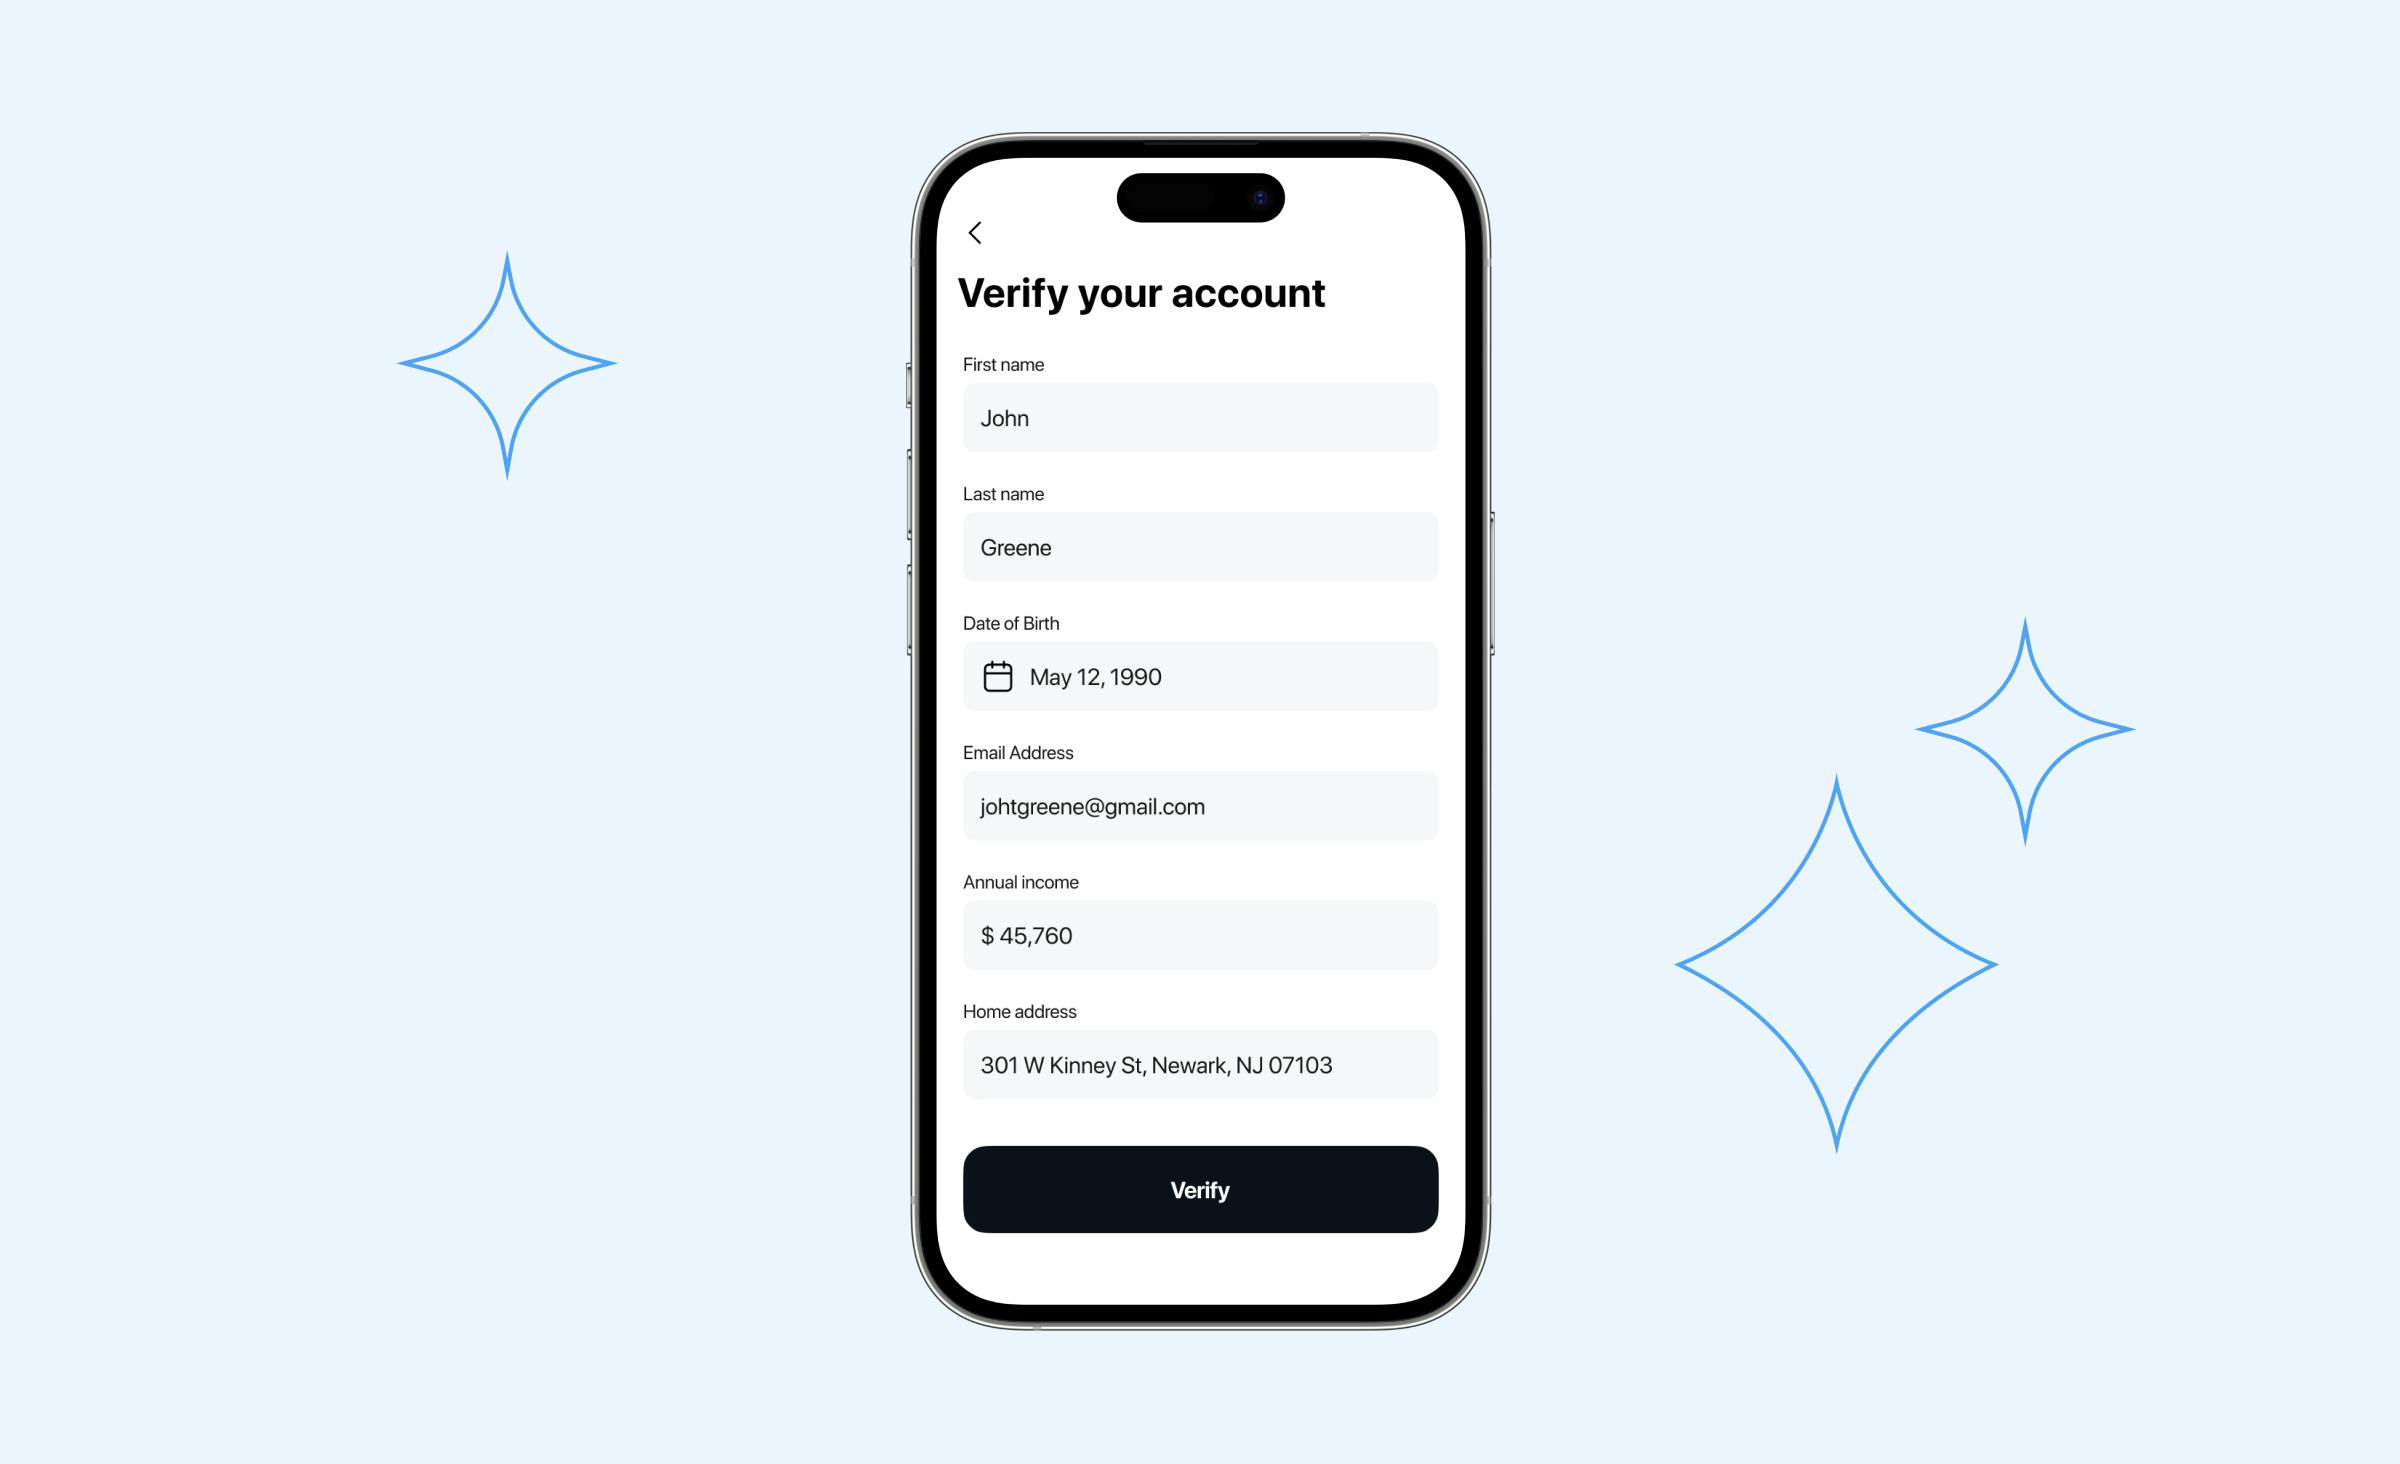 Banking app development: An example of how the KYC procedure may look like